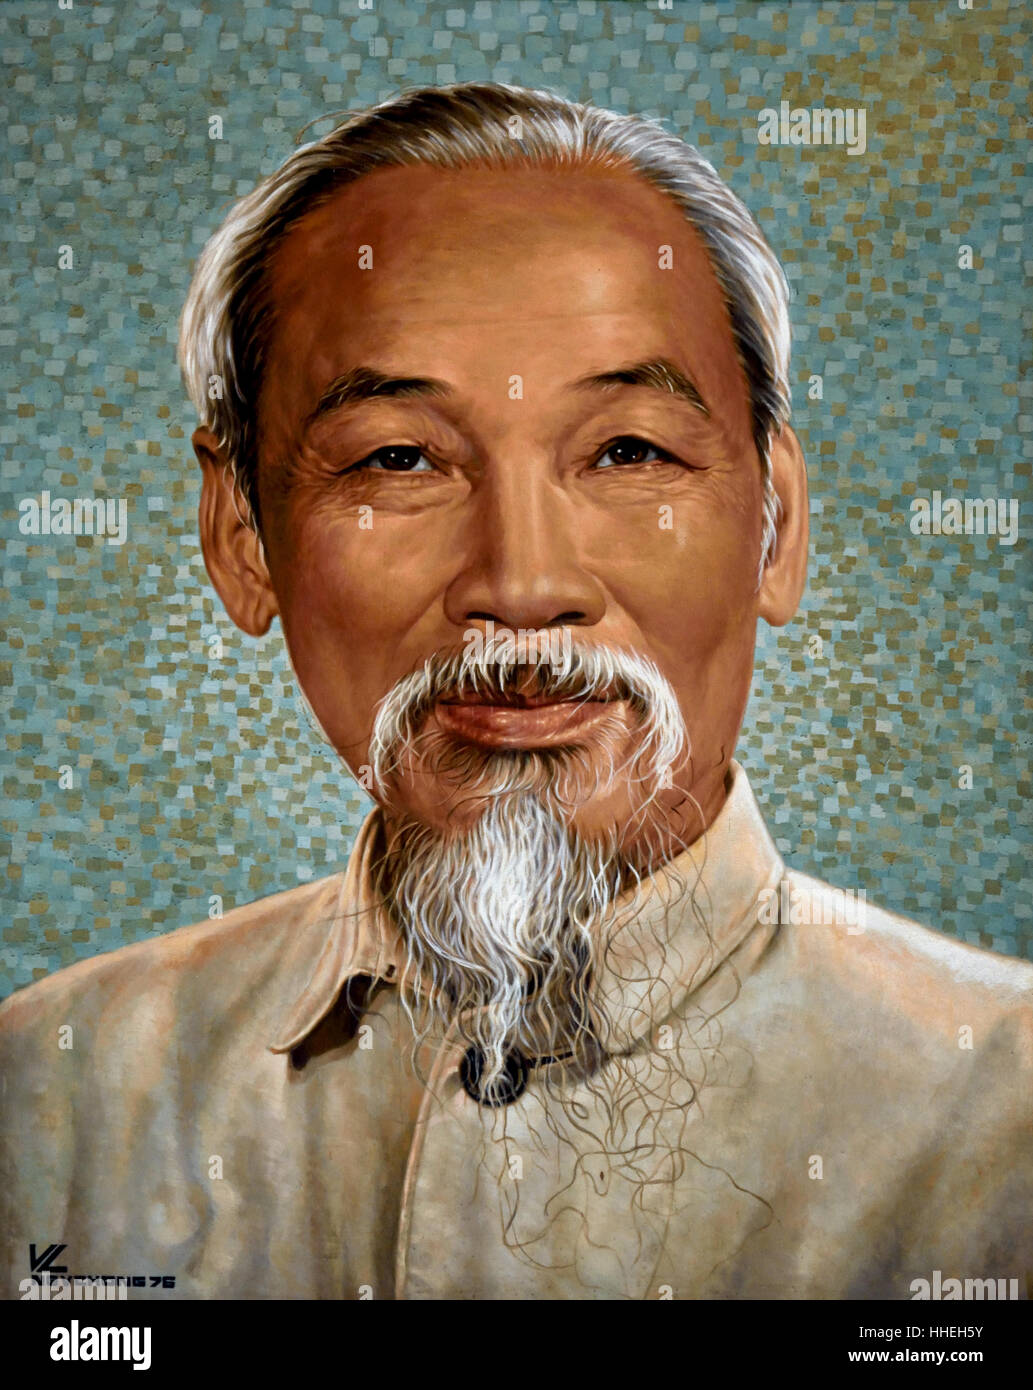 Ho Chi Minh, president of North Vietnam, dies at 79 in 1969 – New York  Daily News